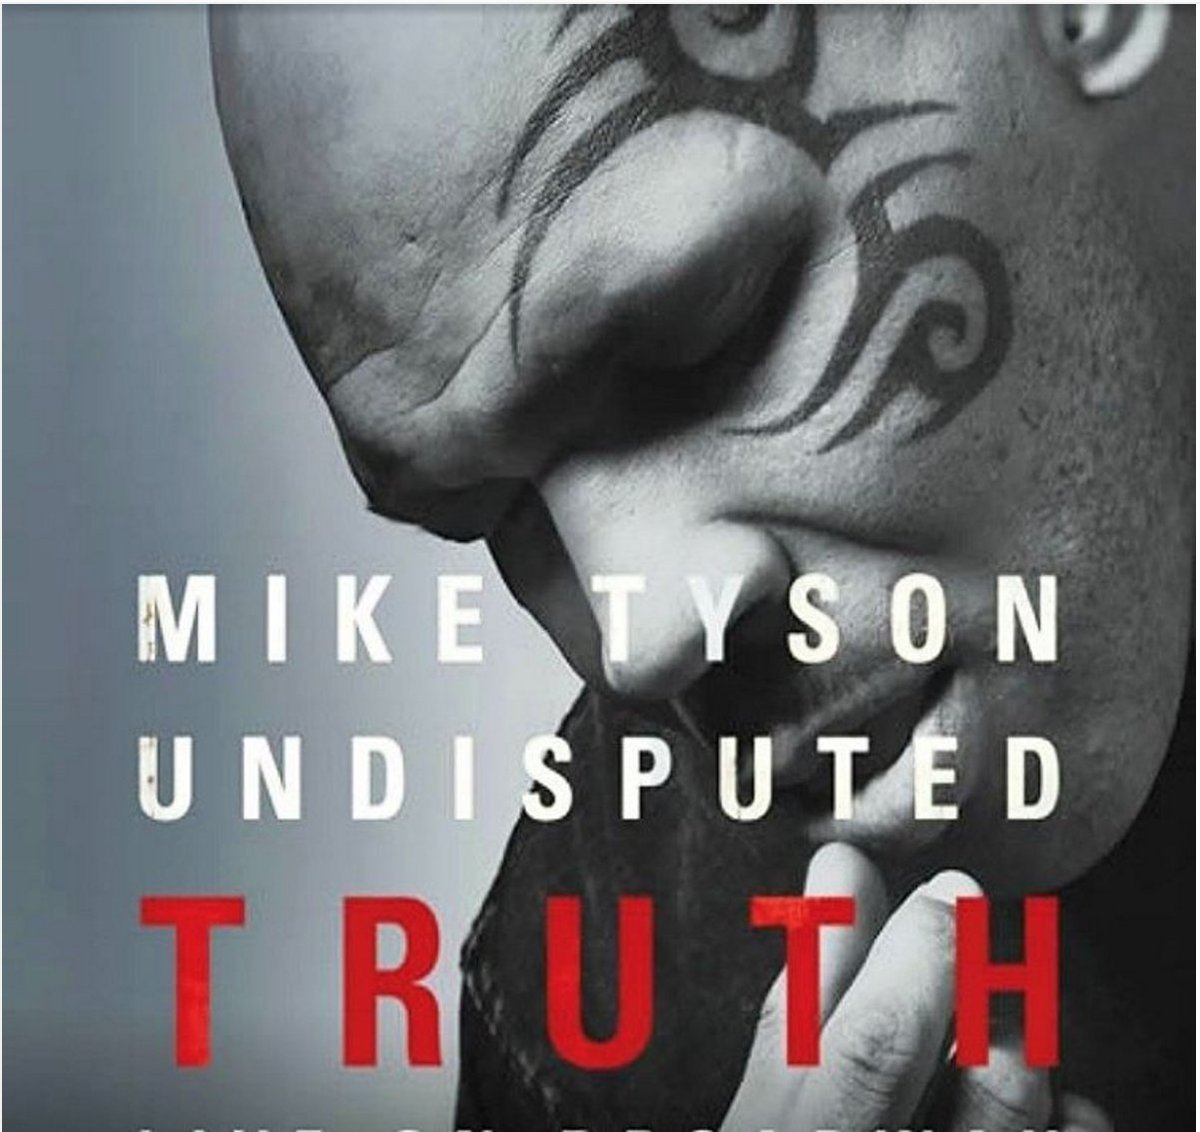 This is the last weekend for #MikeTyson #UndisputedTruth @MGMGrand. Call 866.740.7711 for tickets https://t.co/40flLNRCNt